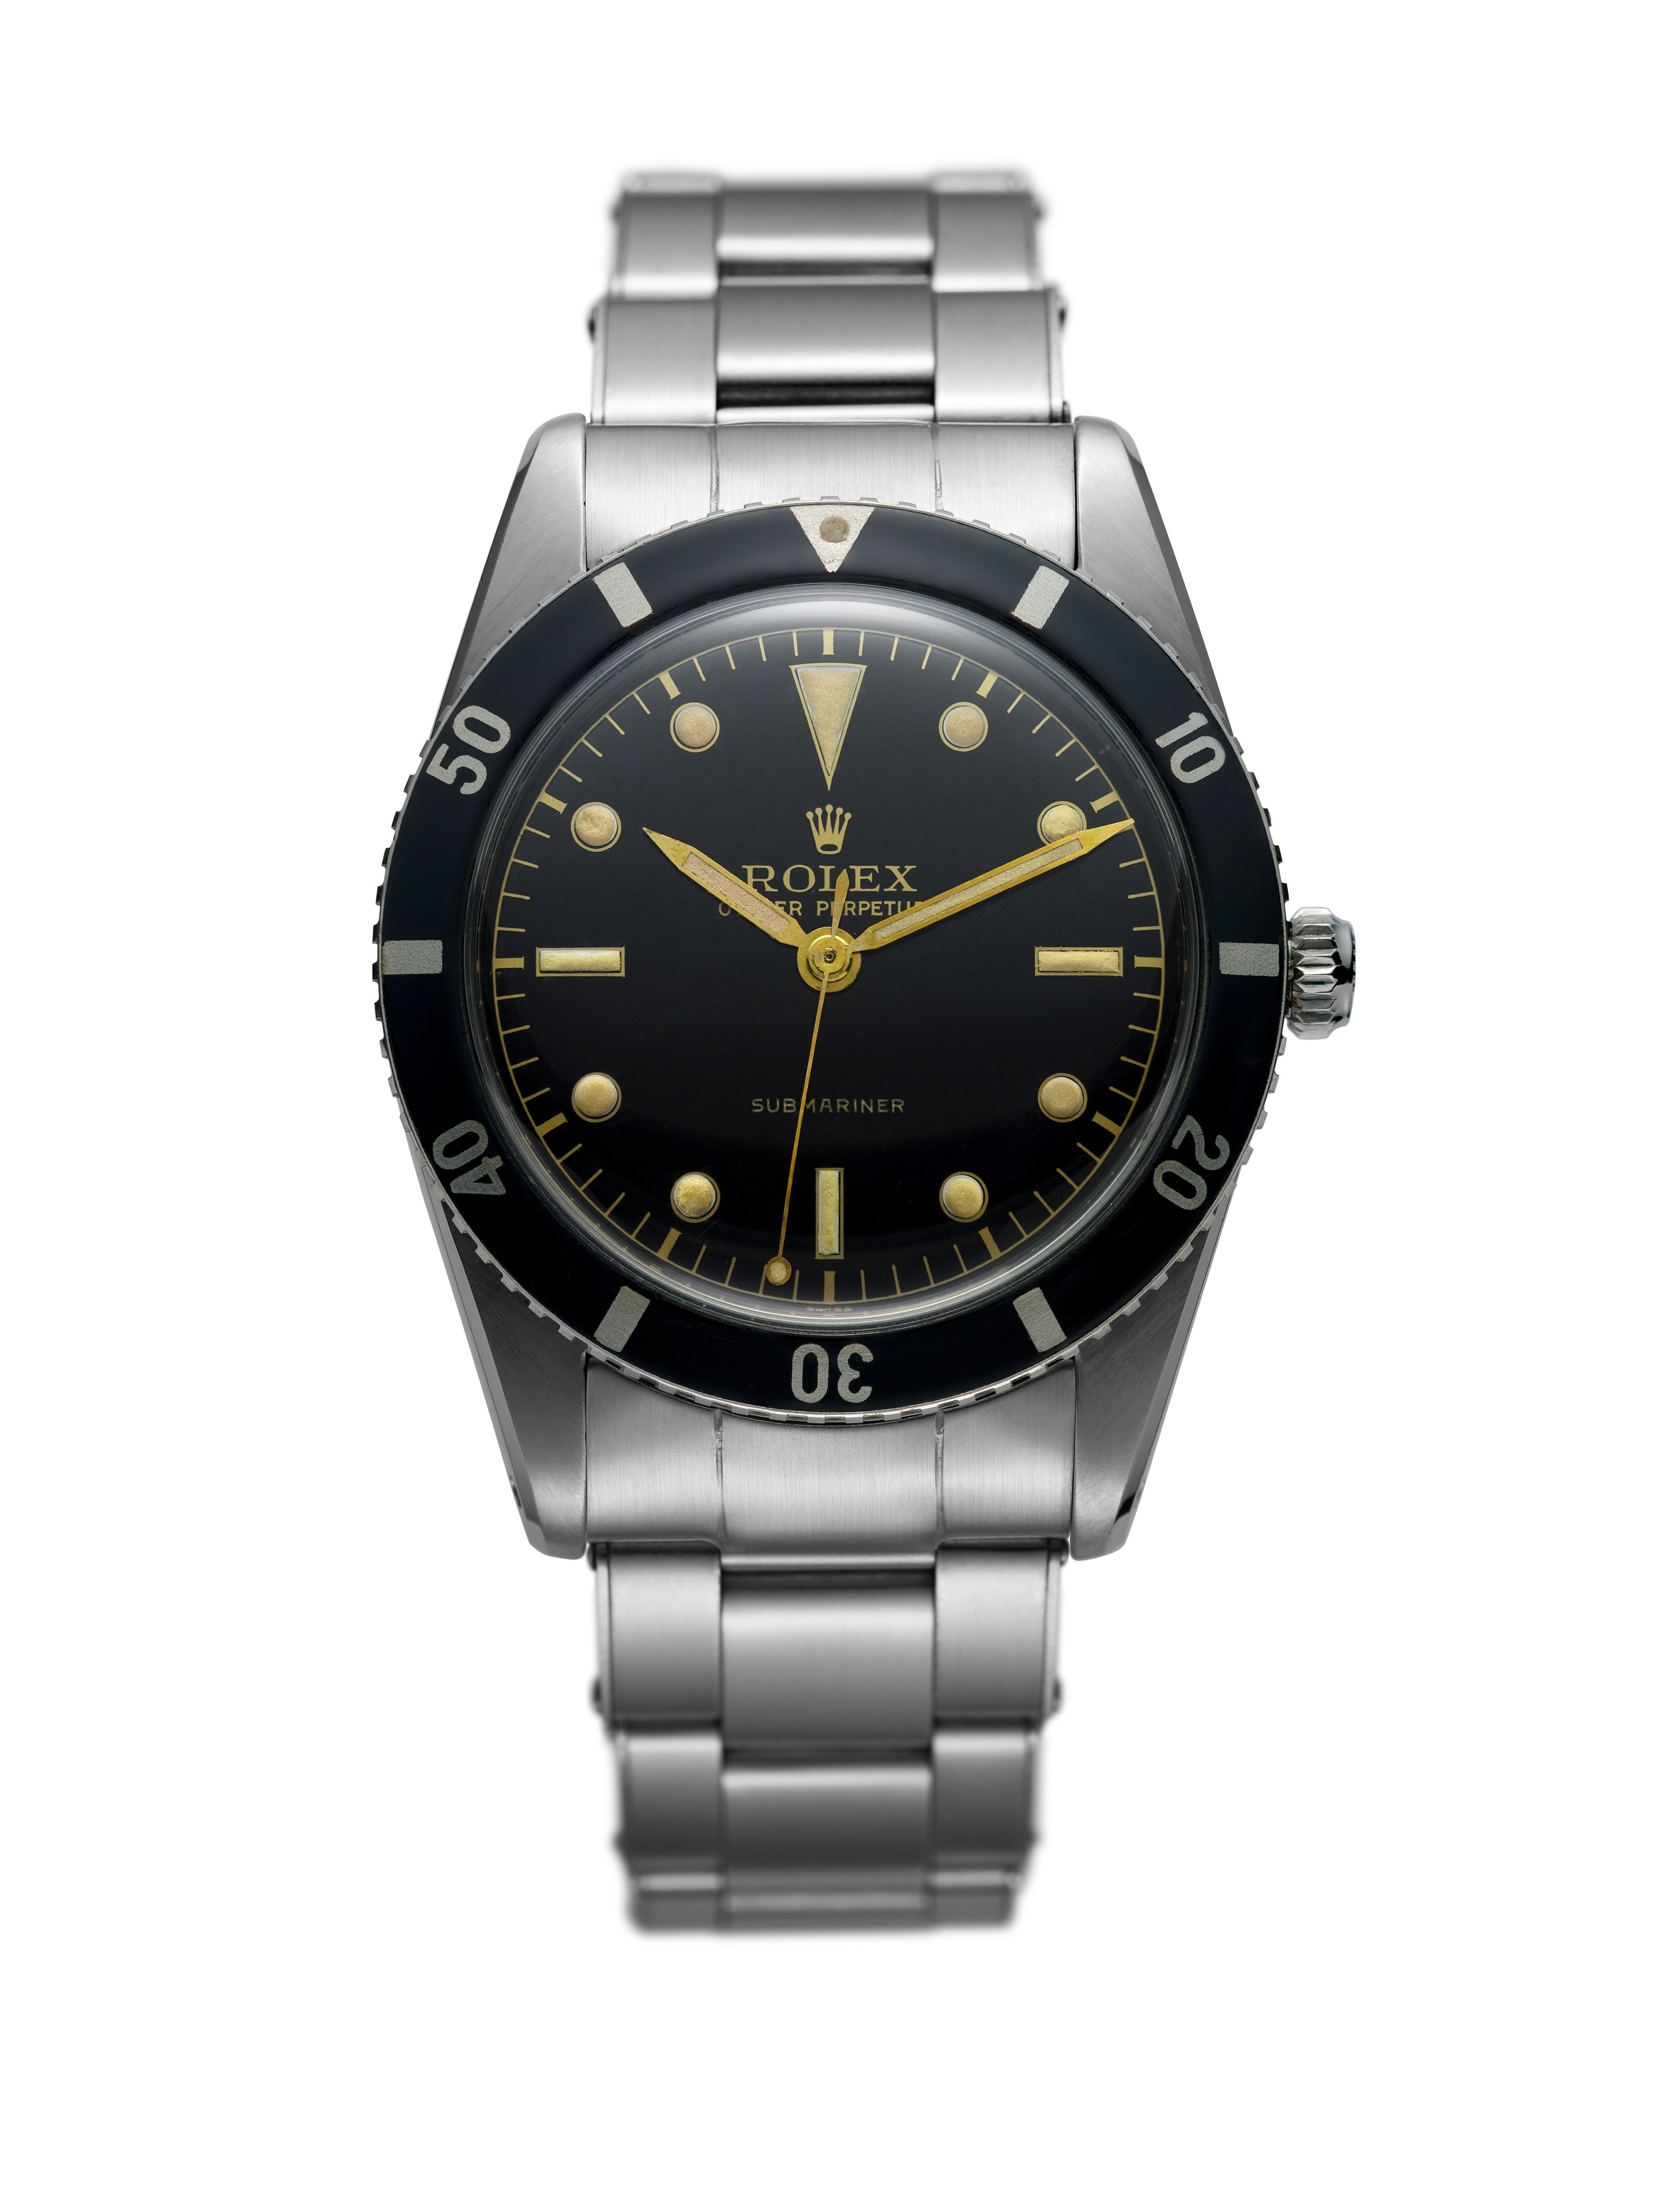 A still from the chapter “The First Waterproof Watch: The Story of Rolex, the Rolex Oyster & Hans Wilsdorf” (photo © Rolex)